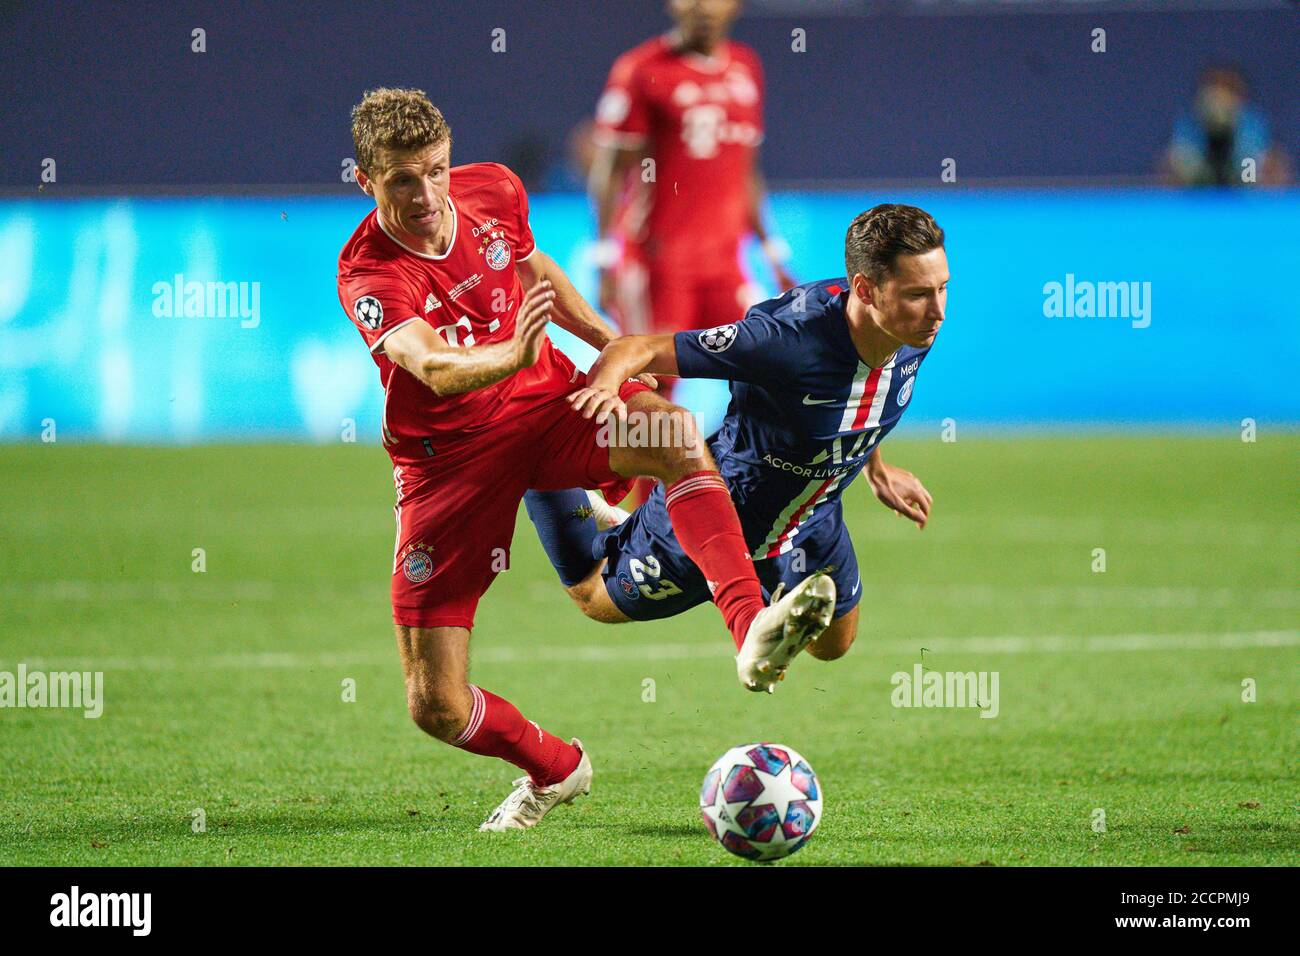 Lisbon, Lissabon, Portugal, 23rd August 2020.  Thomas MUELLER, MÜLLER, FCB 25  compete for the ball, tackling, duel, header, zweikampf, action, fight against Julian DRAXLER, PSG 23  in the final match UEFA Champions League, final tournament FC BAYERN MUENCHEN - PARIS ST. GERMAIN (PSG) 1-0 in season 2019/2020, FCB,  © Peter Schatz / Alamy Live News / Pool   - UEFA REGULATIONS PROHIBIT ANY USE OF PHOTOGRAPHS as IMAGE SEQUENCES and/or QUASI-VIDEO -  National and international News-Agencies OUT Editorial Use ONLY Stock Photo